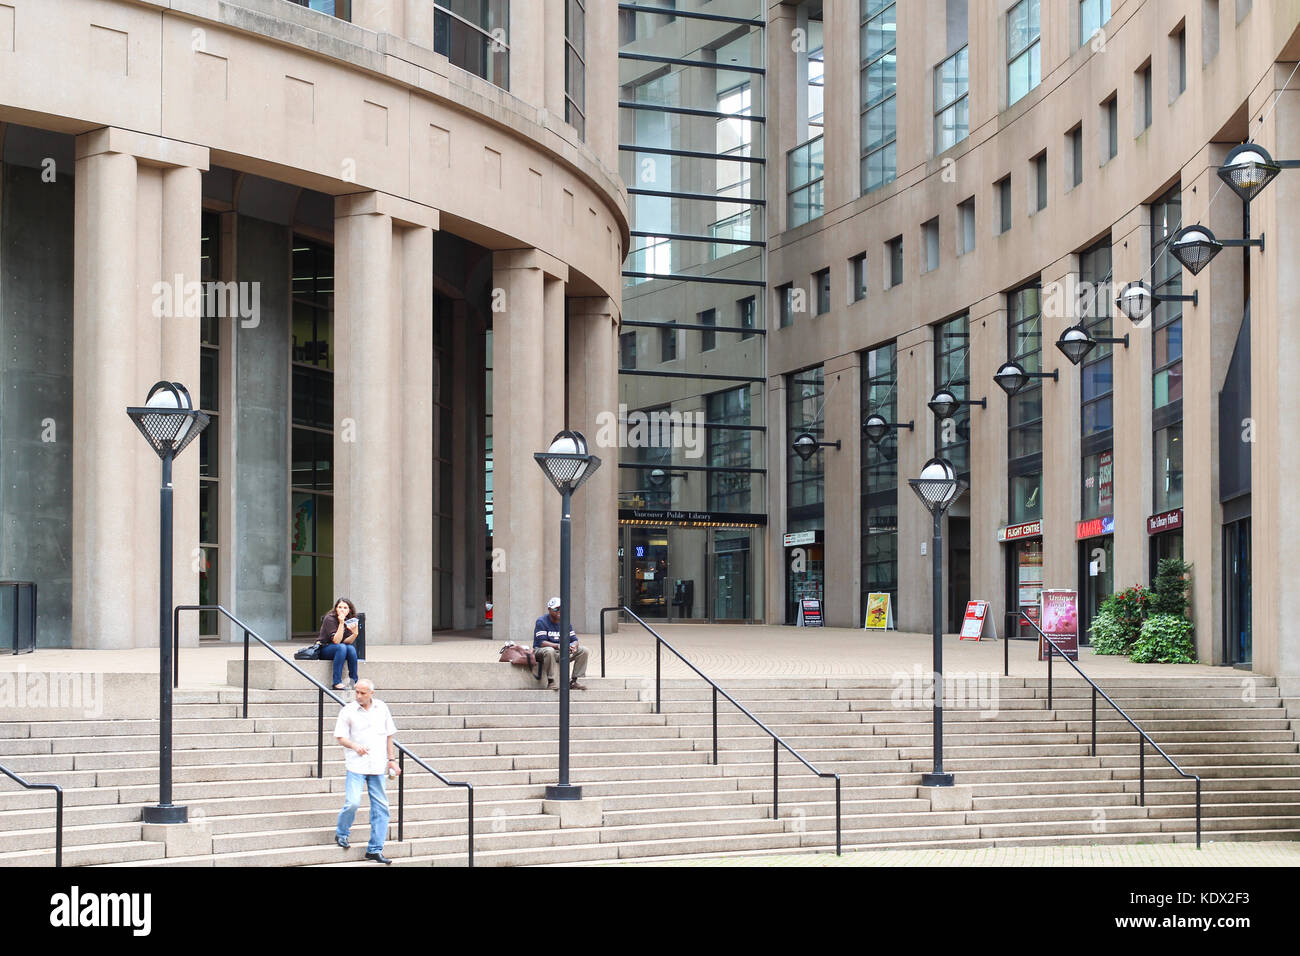 VANCOUVER, CANADA - JULY 18 2013: Exterior of Vancouver Public Library Stock Photo